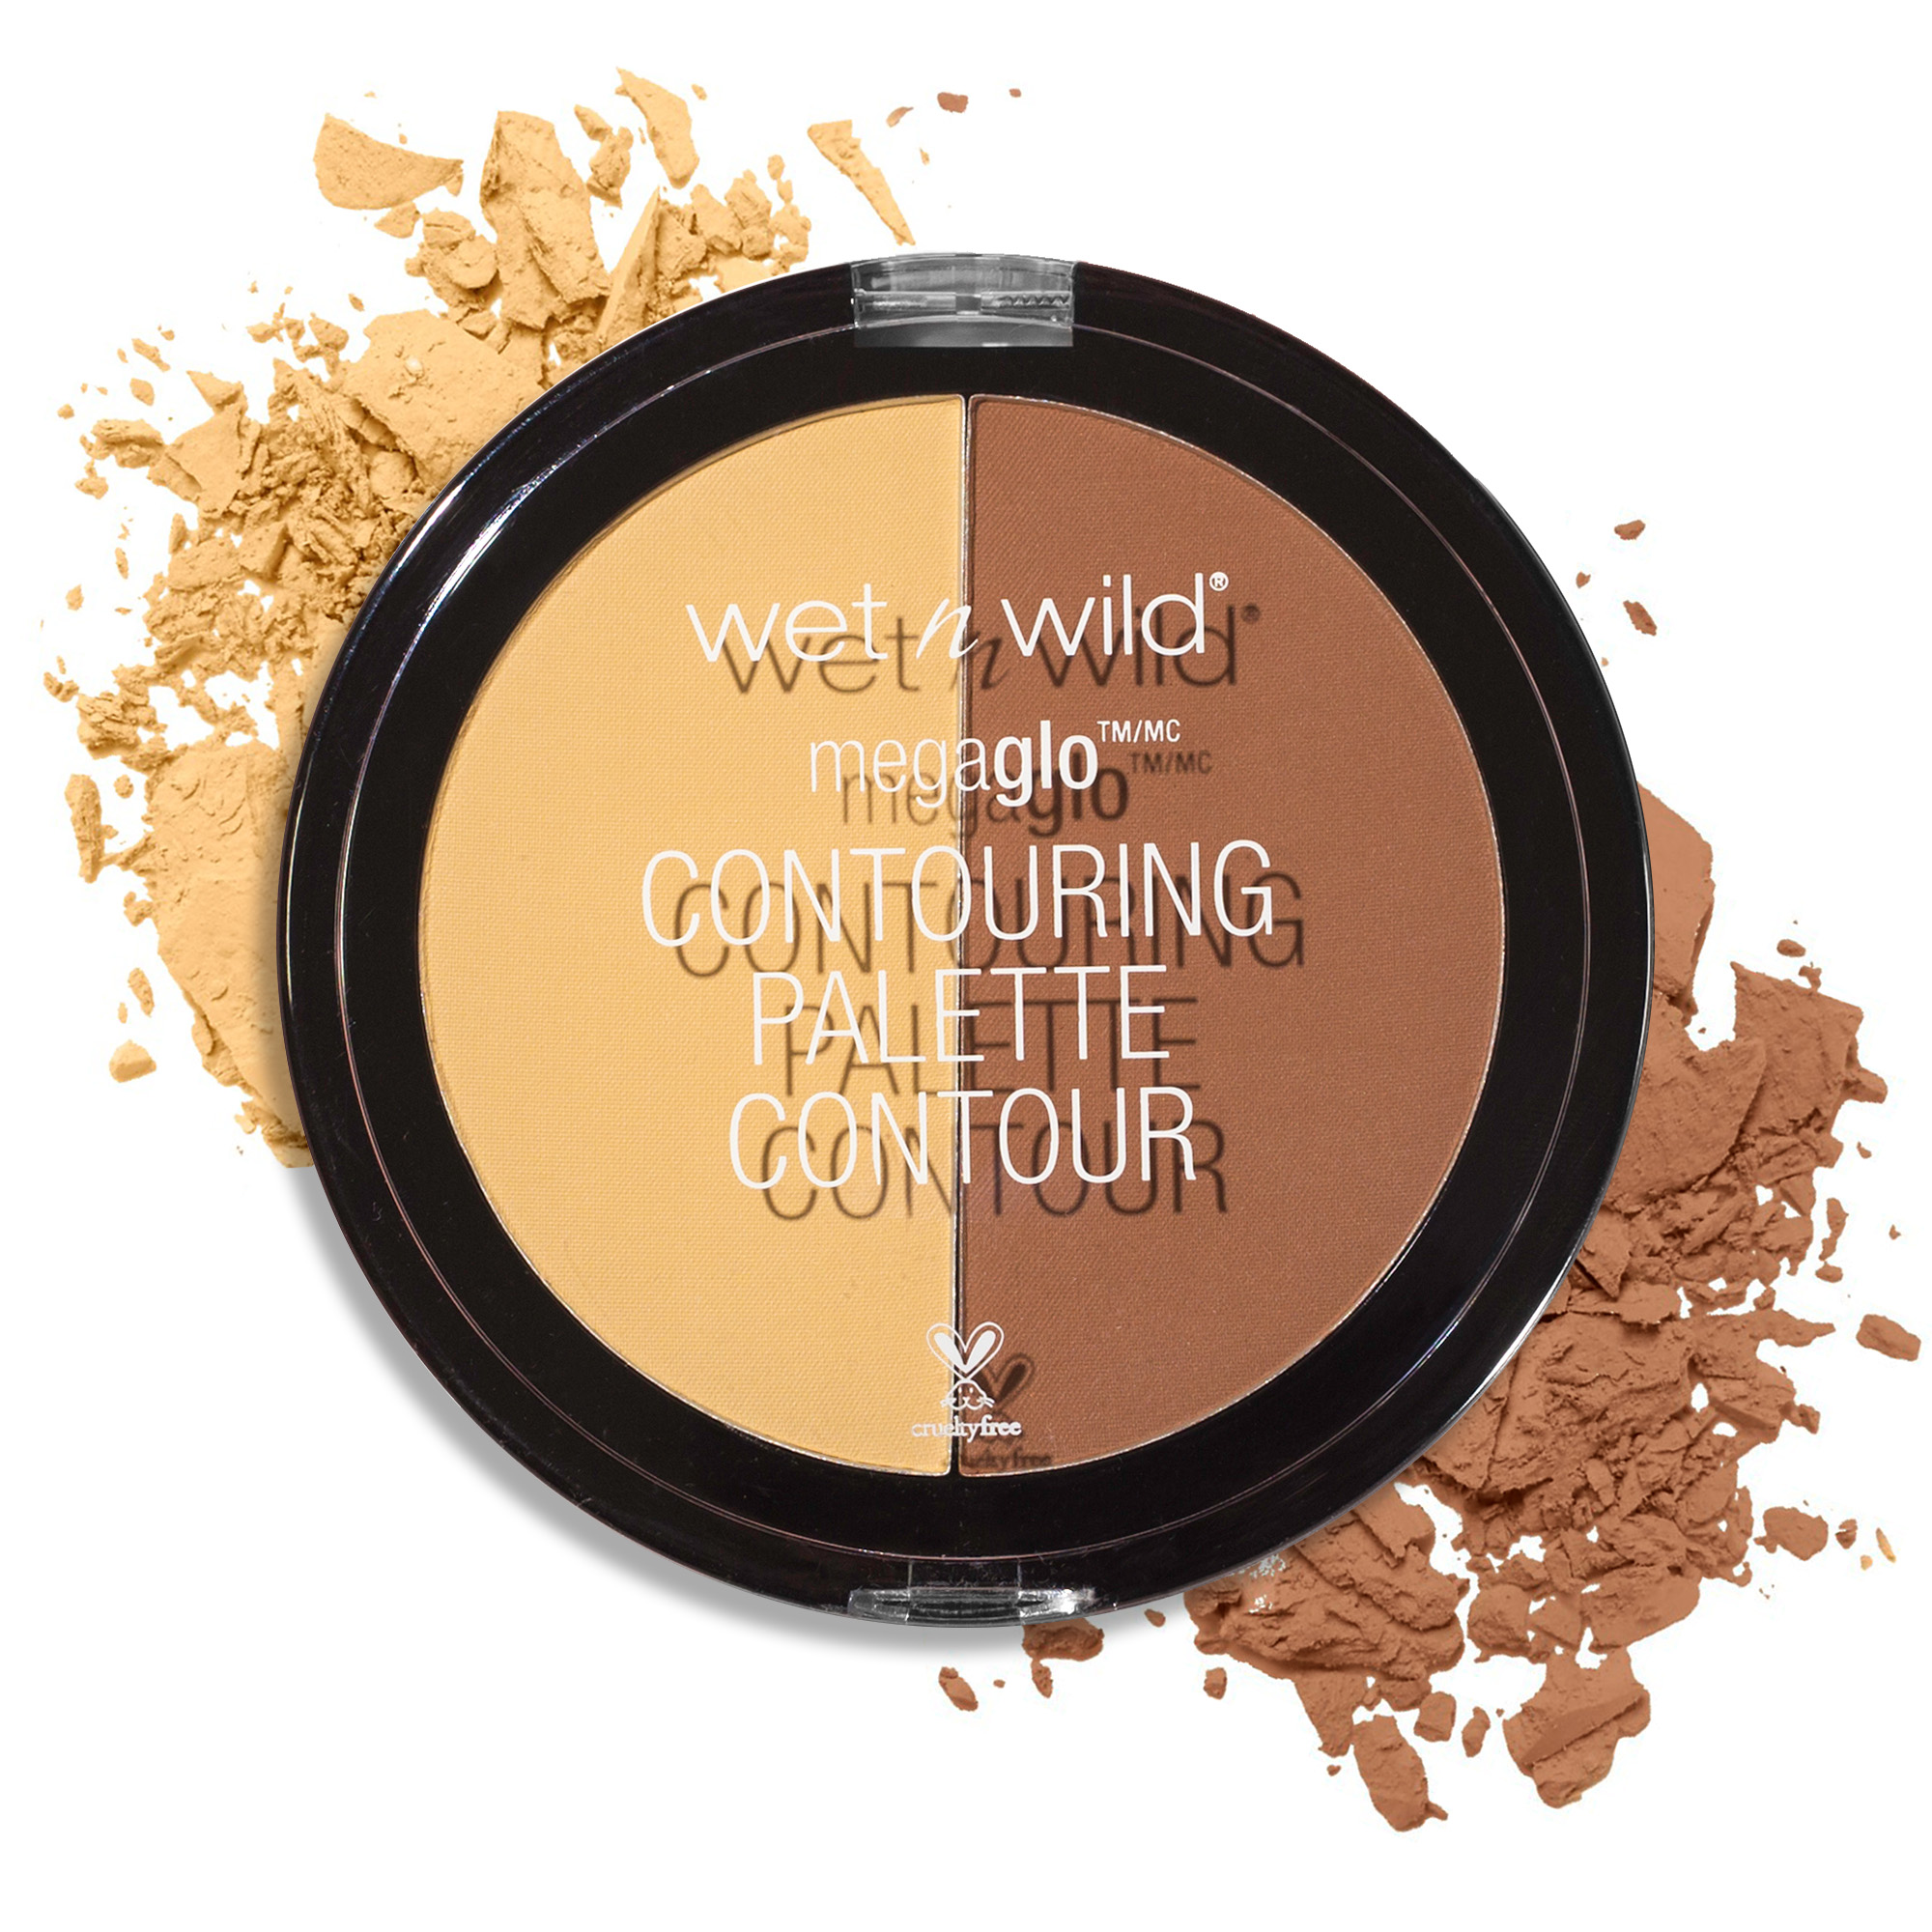 wet n wild MegaGlo Contouring Palette - Caramel Toffee - image 1 of 9